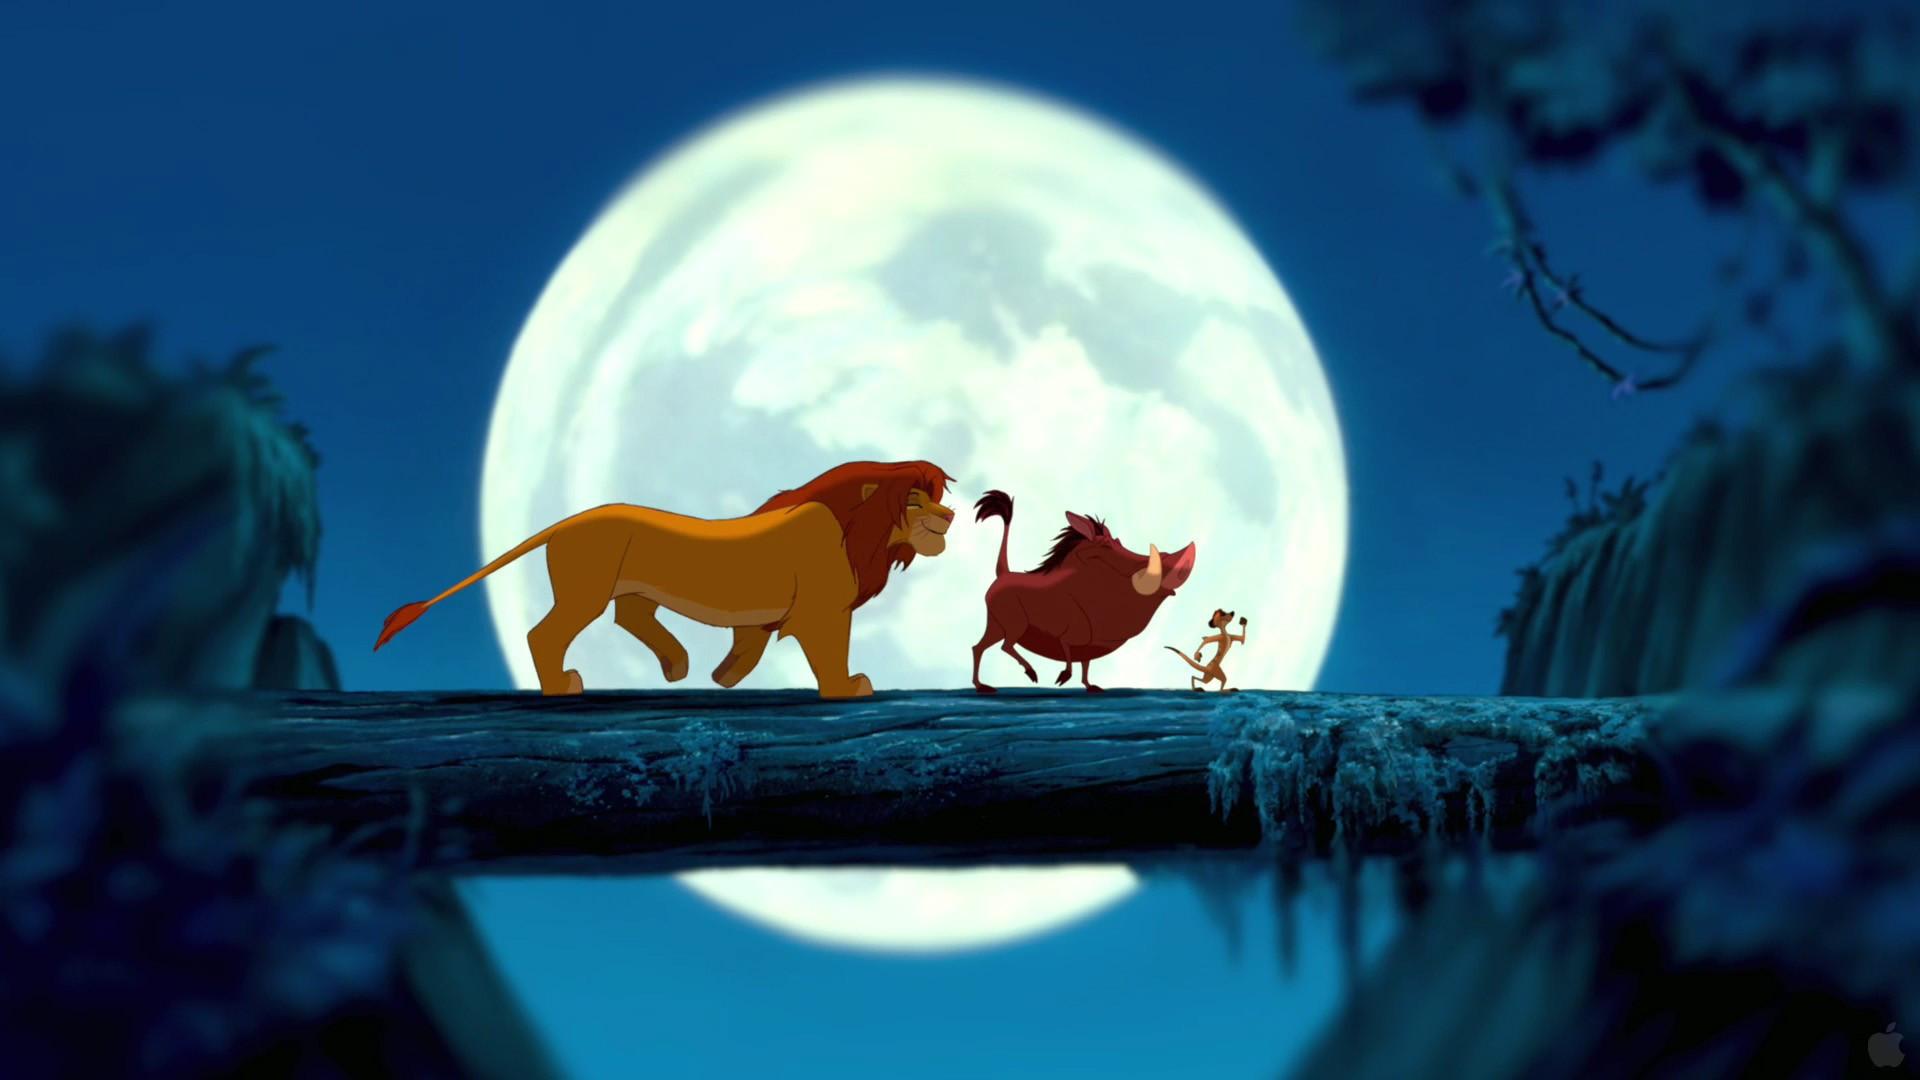 The Lion King Wallpaper background picture